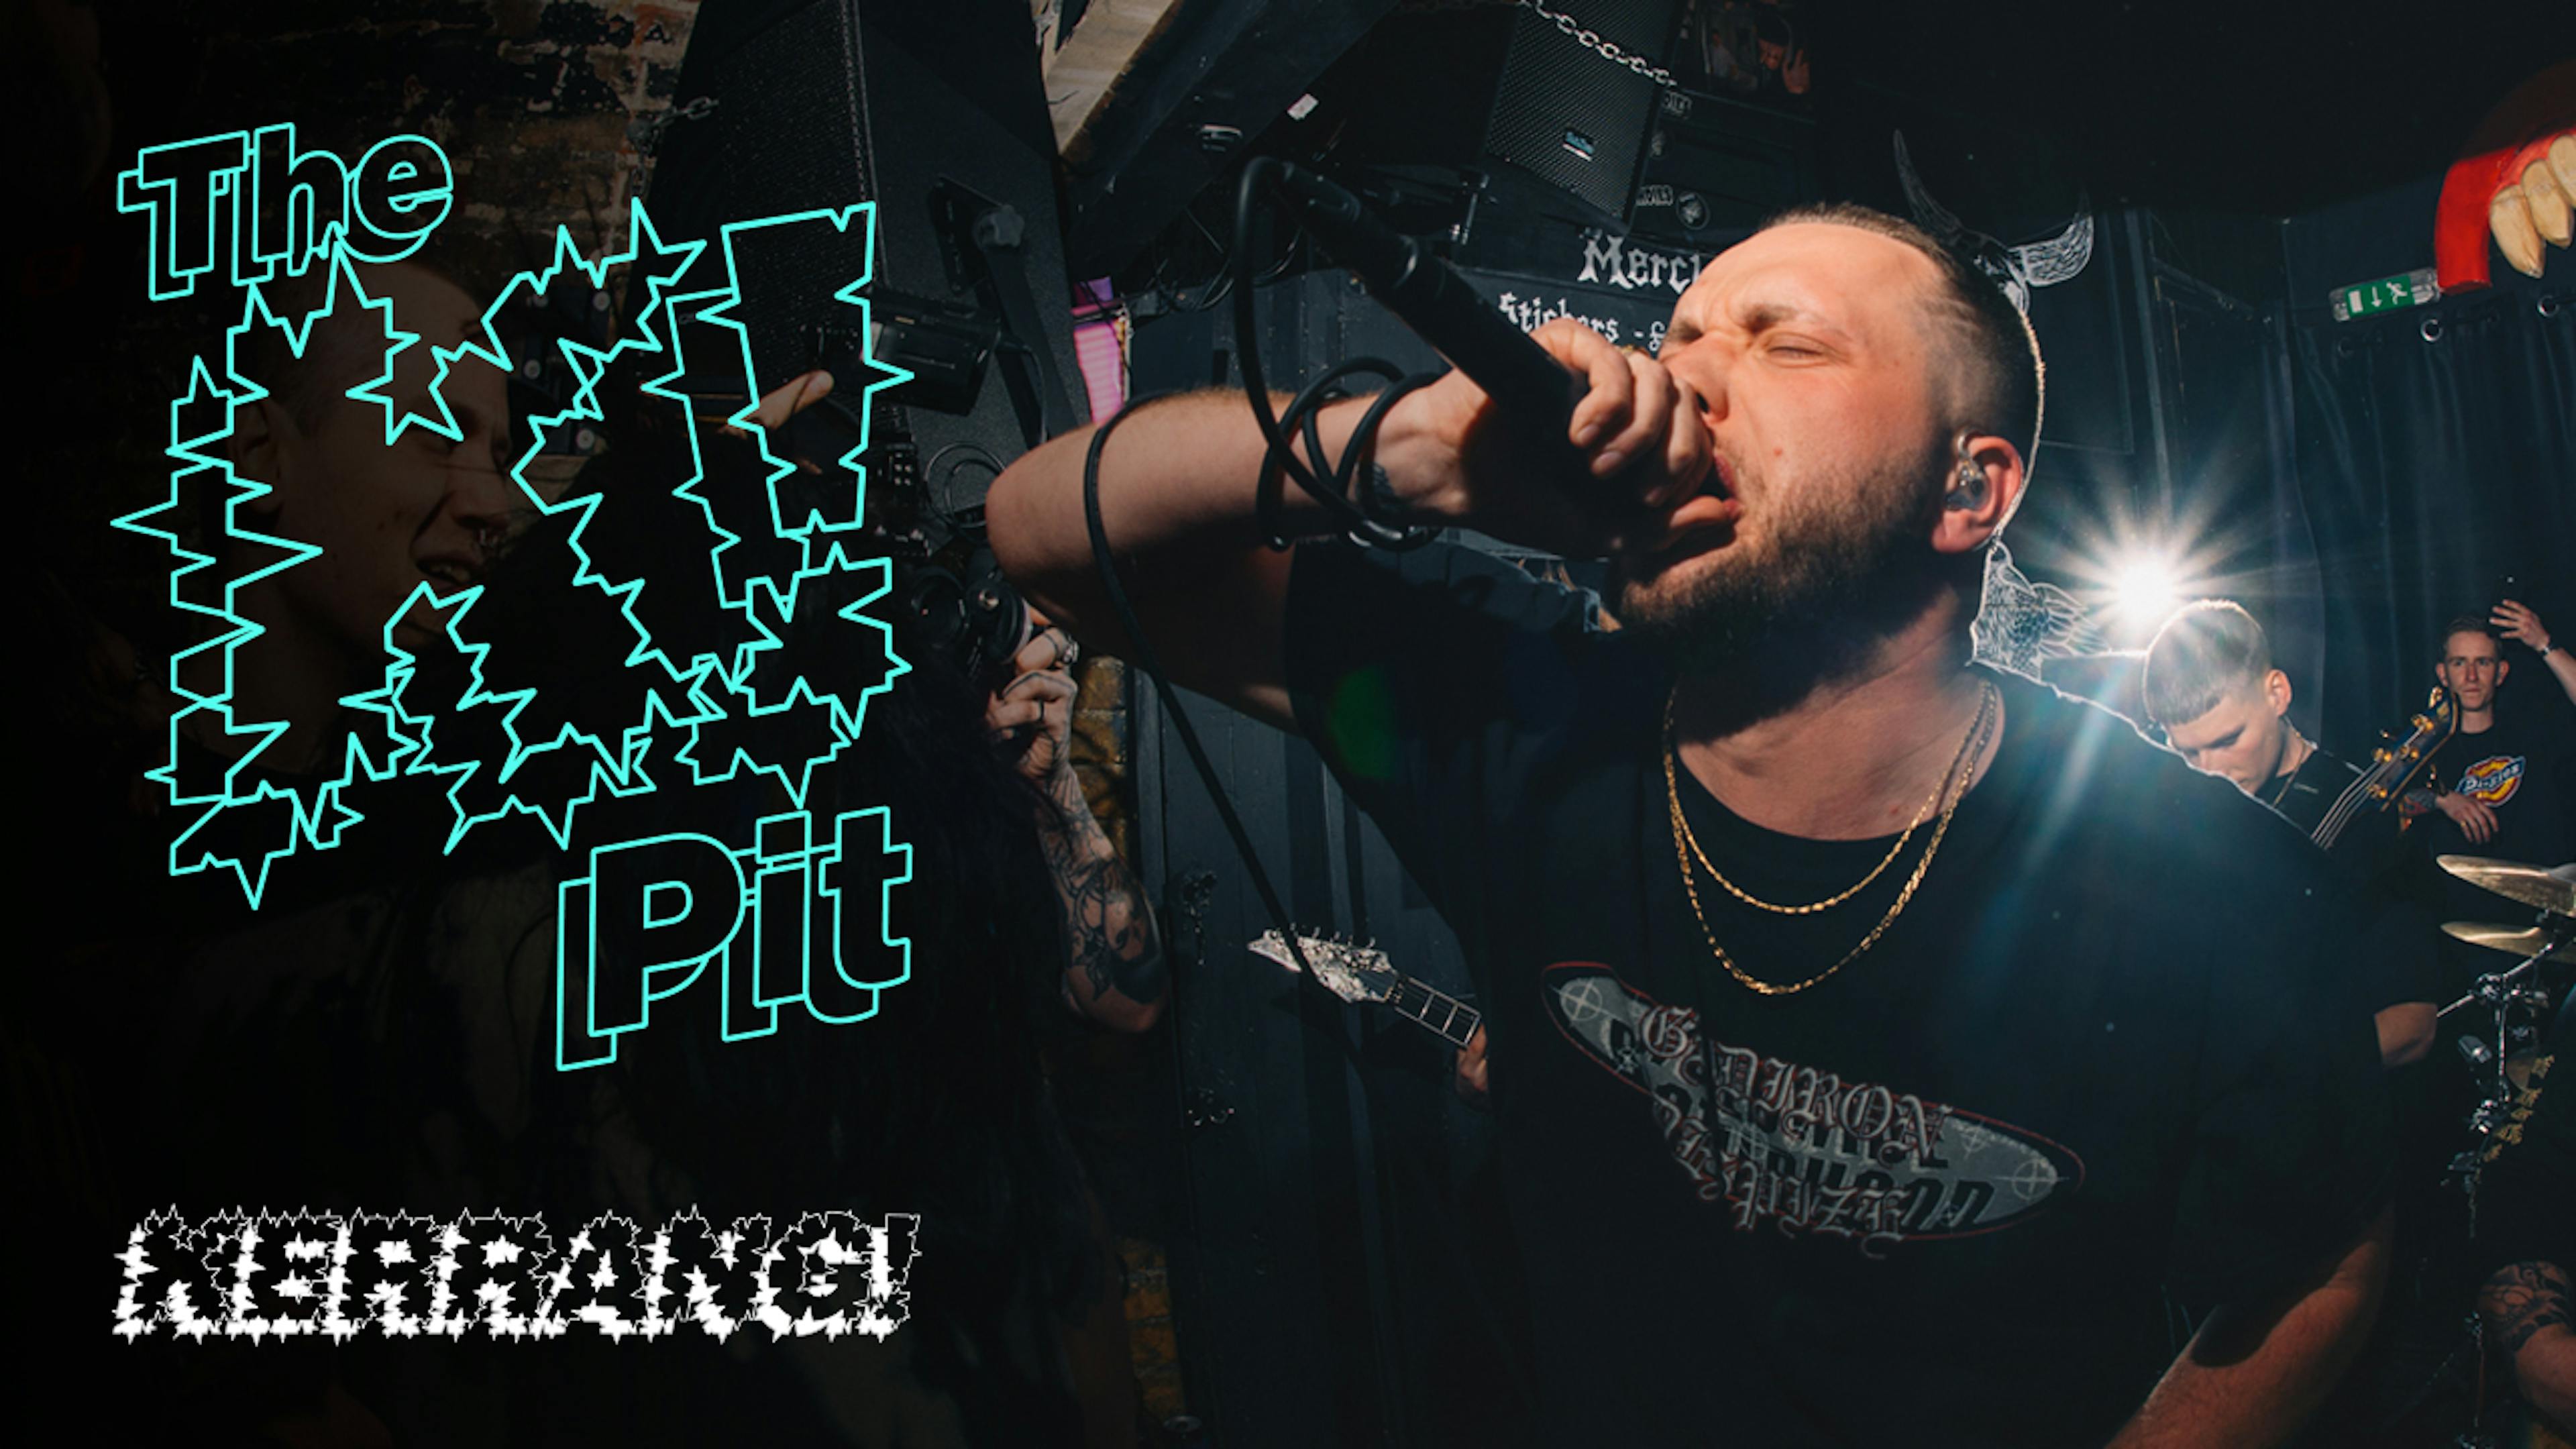 Watch Malevolence’s brutal performance in The K! Pit